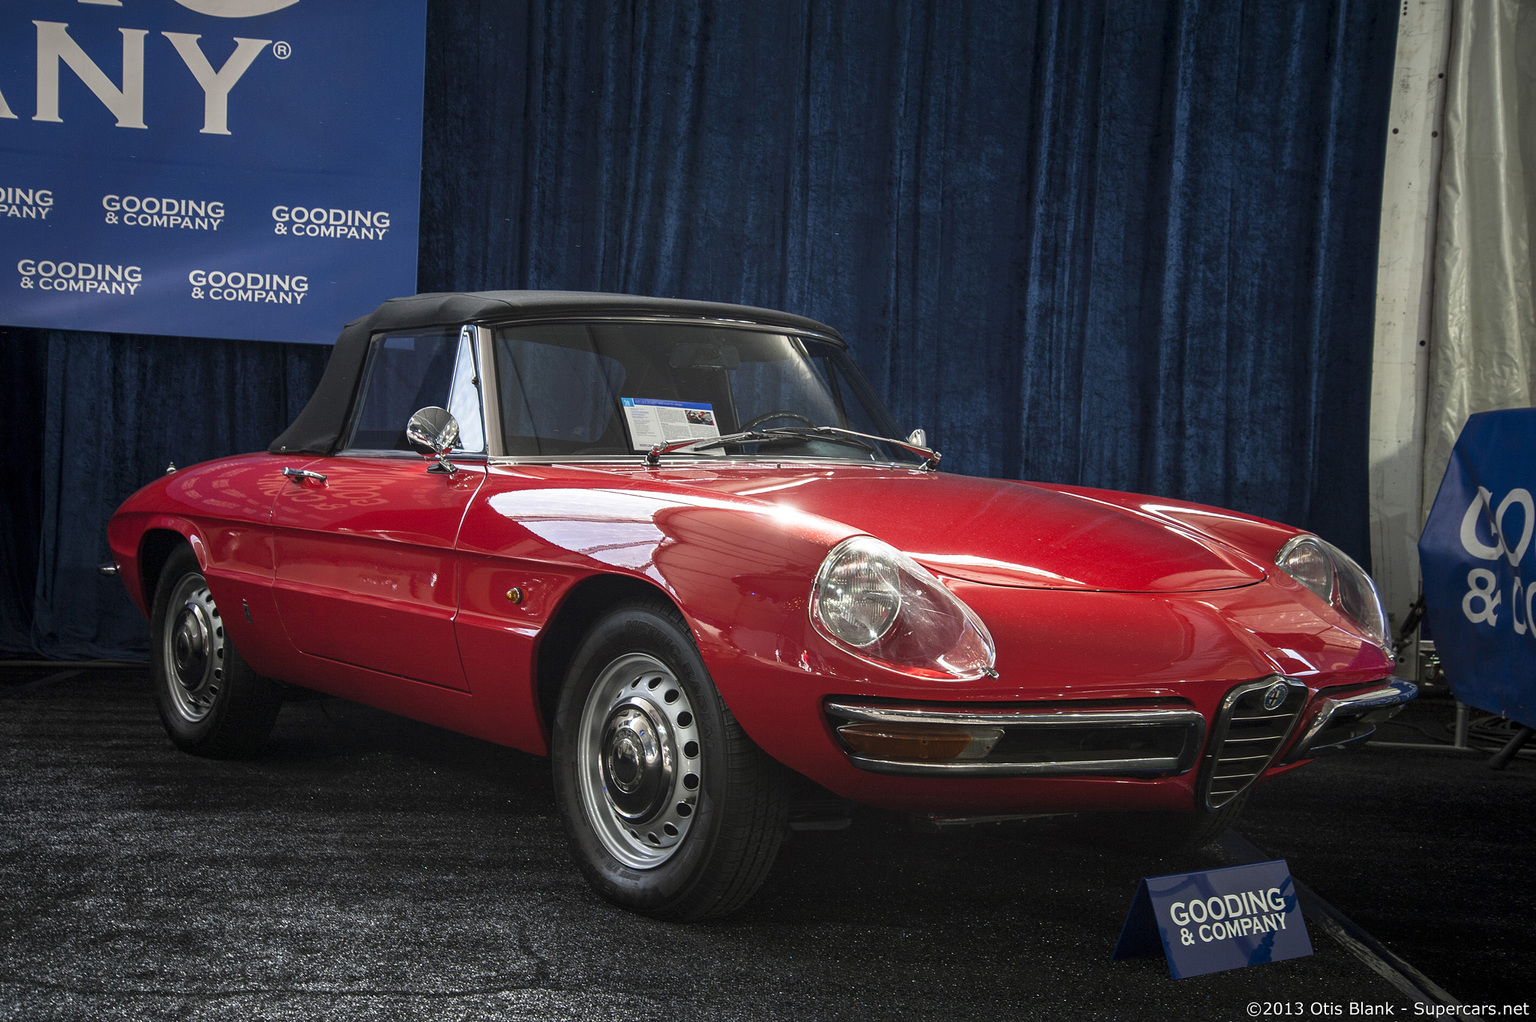 The 2013 Scottsdale Auctions by Gooding & Company